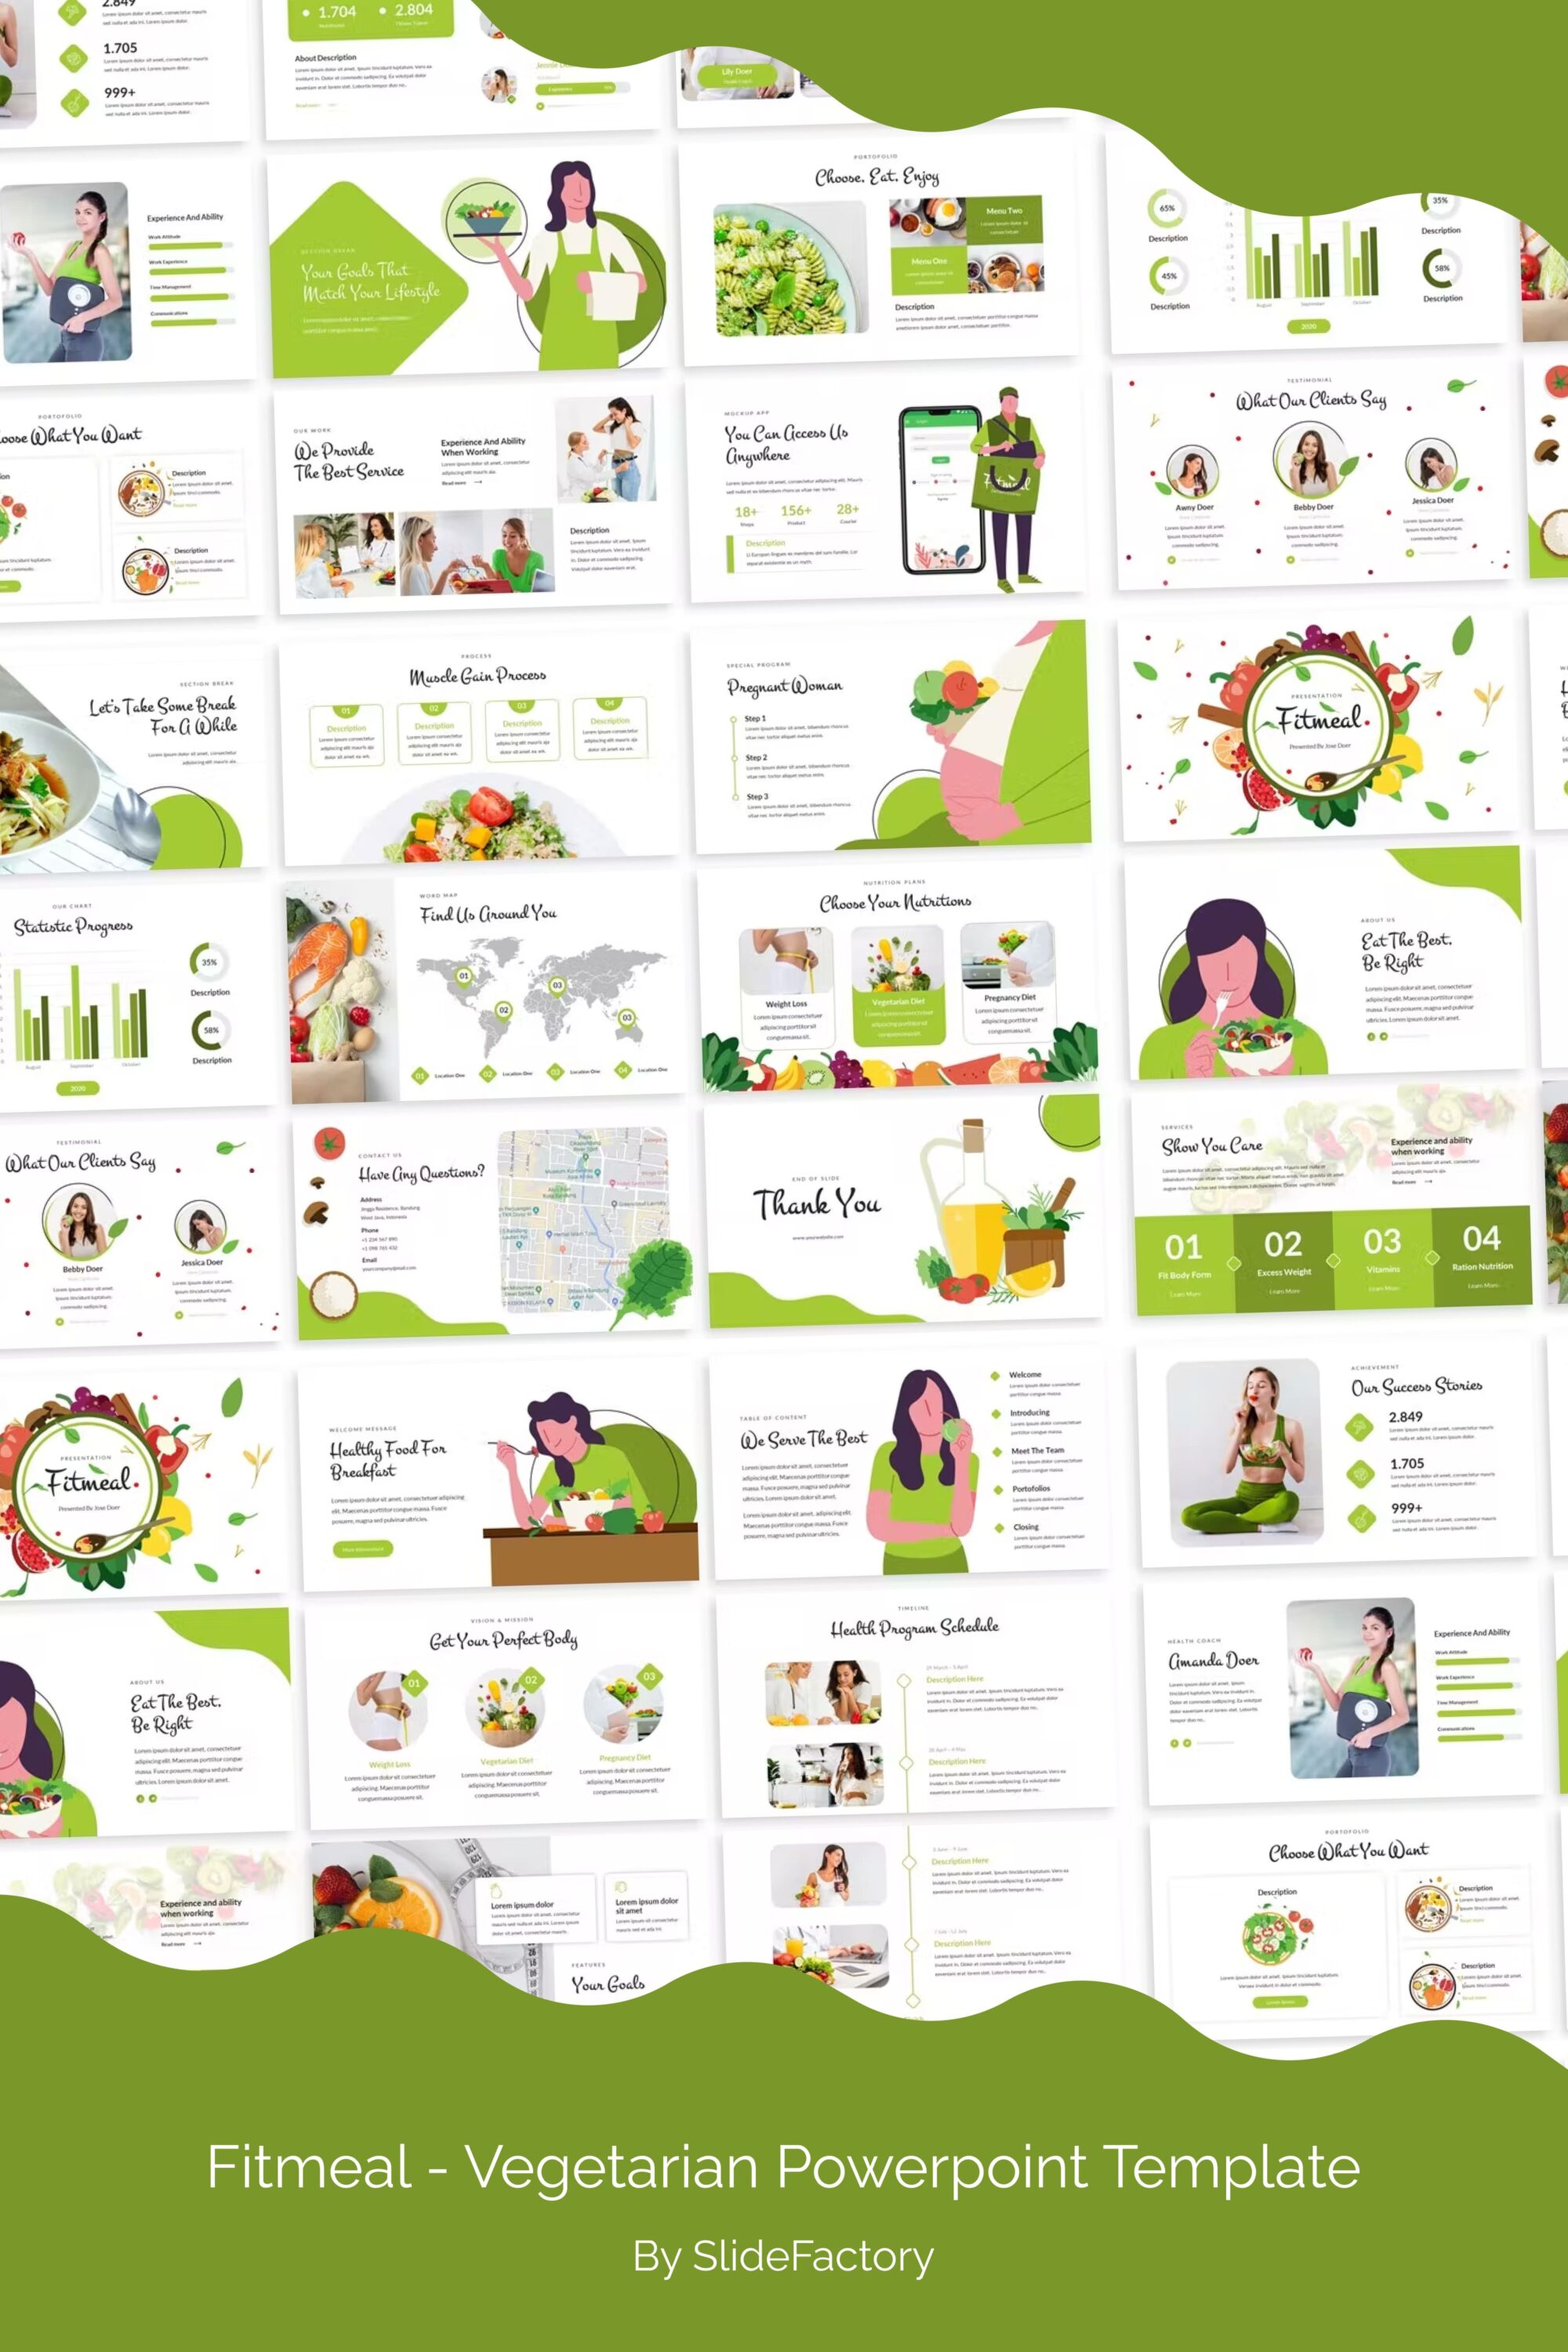 Fitmeal Vegetarian Powerpoint Template - pinterest image preview.